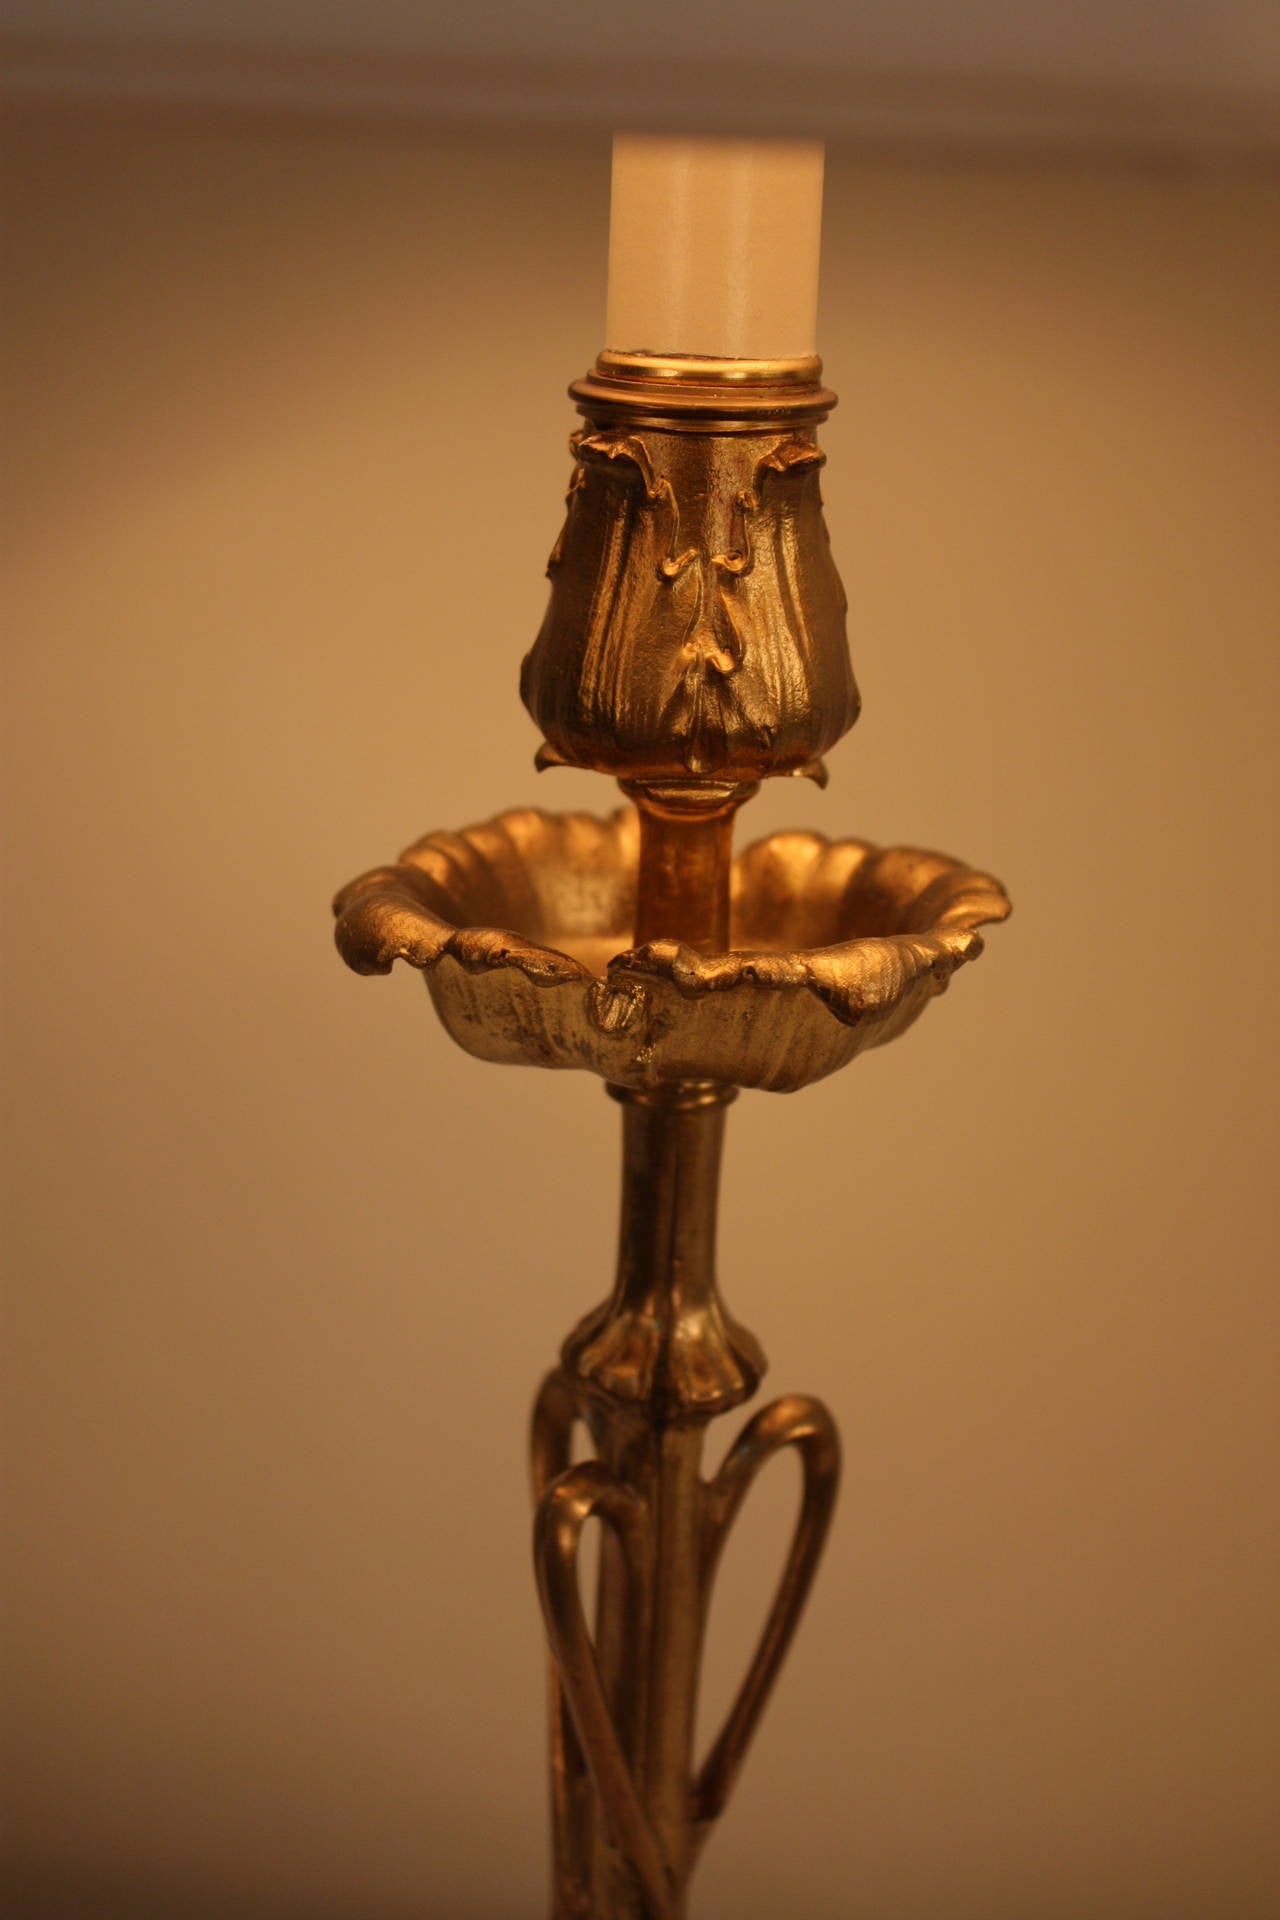 19th Century French Art Nouveau Table Lamp